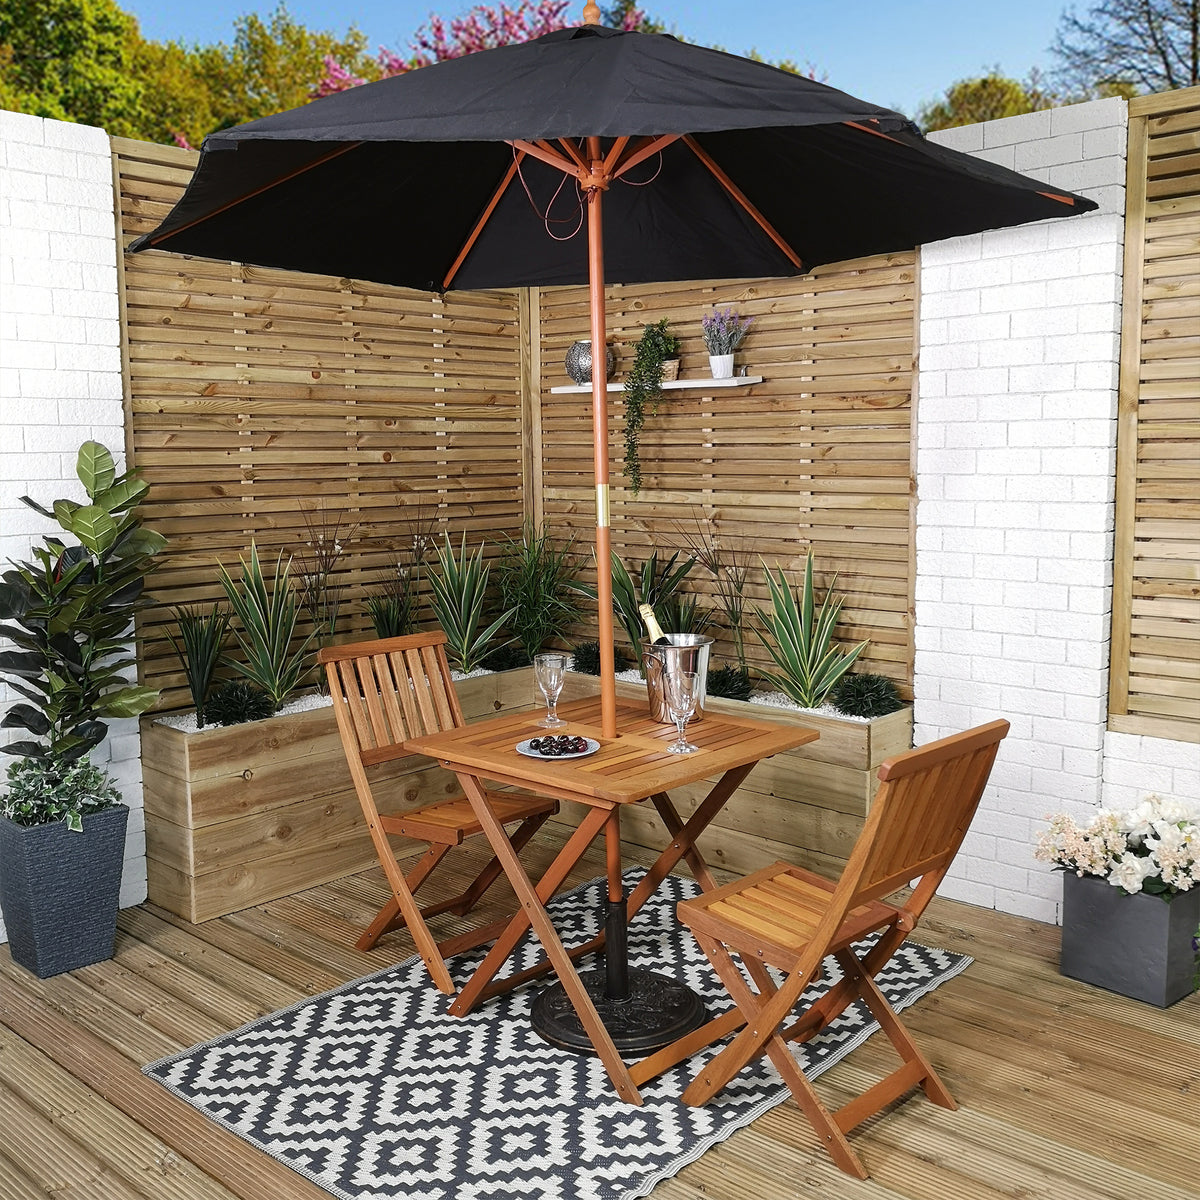 Outdoor 2 Person Folding Square Wooden Garden Patio Dining Table Chairs Parasol and Base Set